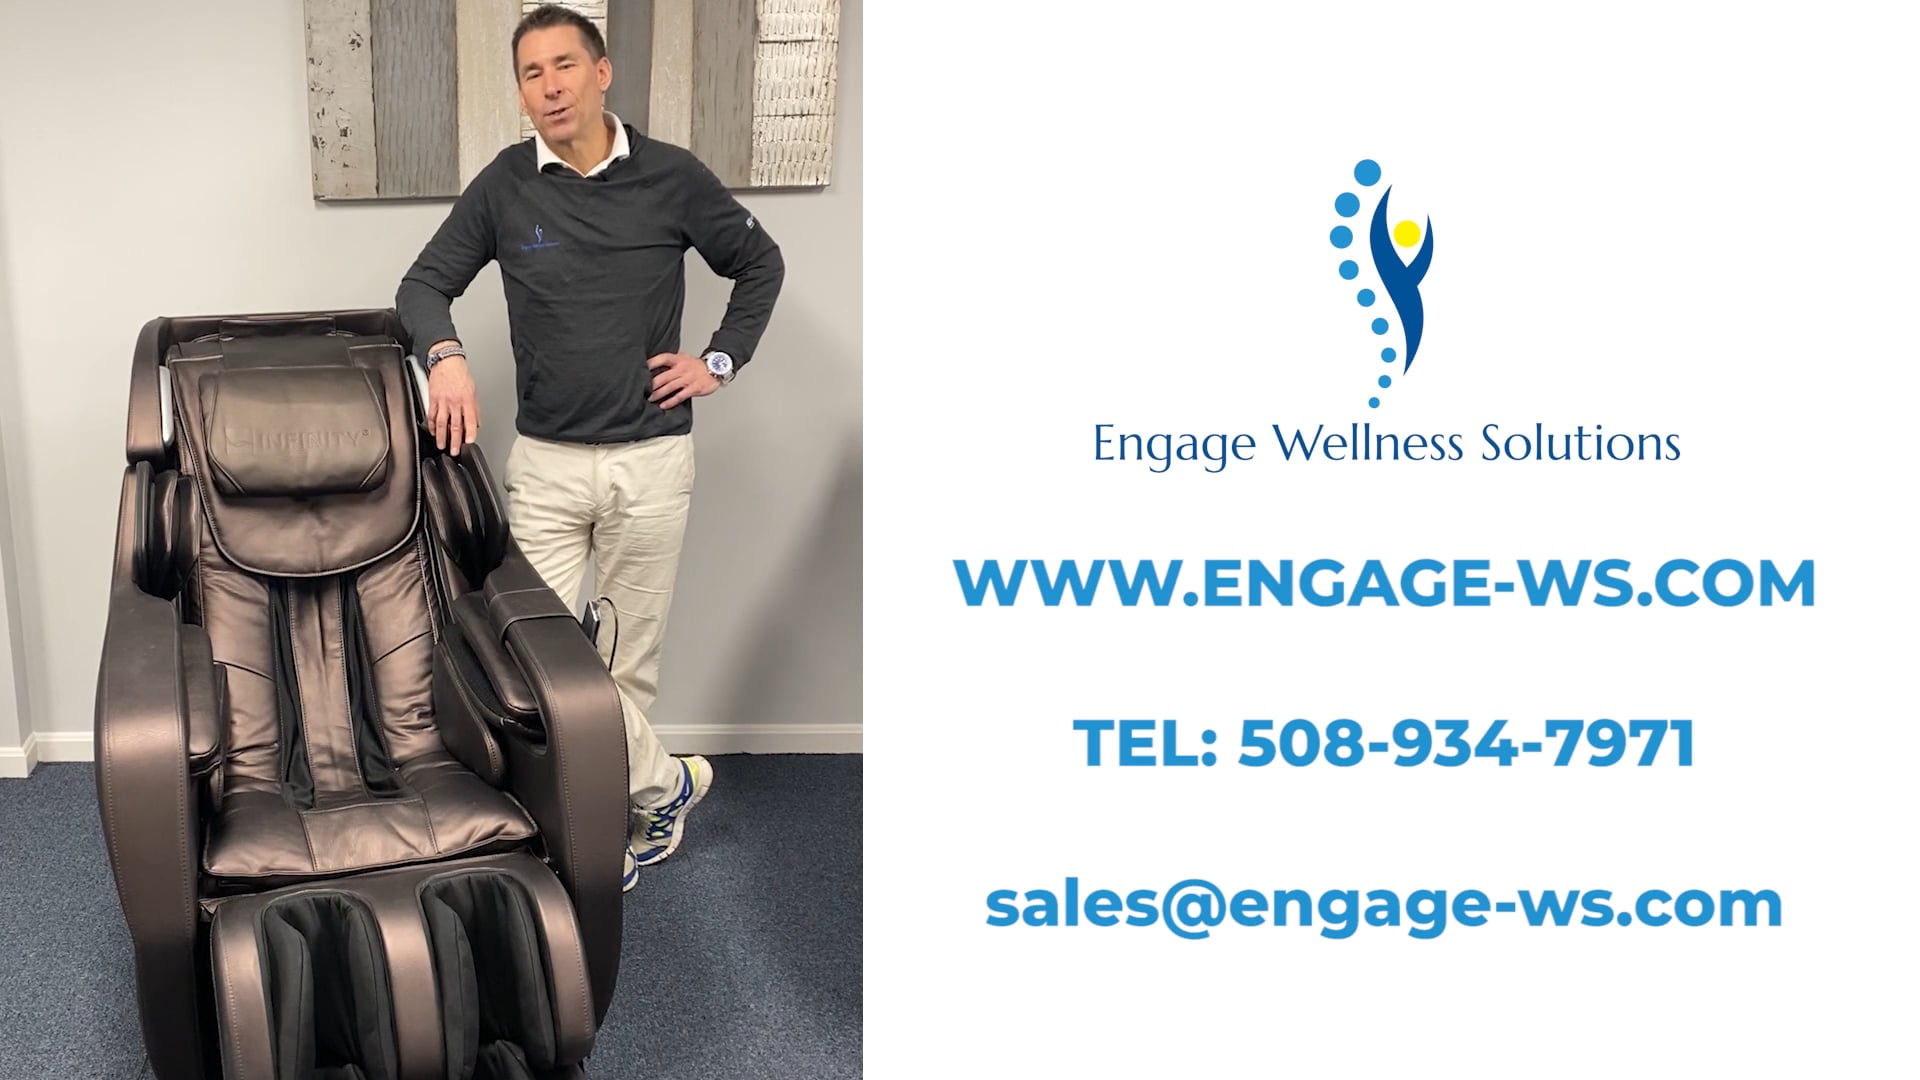 Office Chair Massage Service from Engage Wellness Solutions